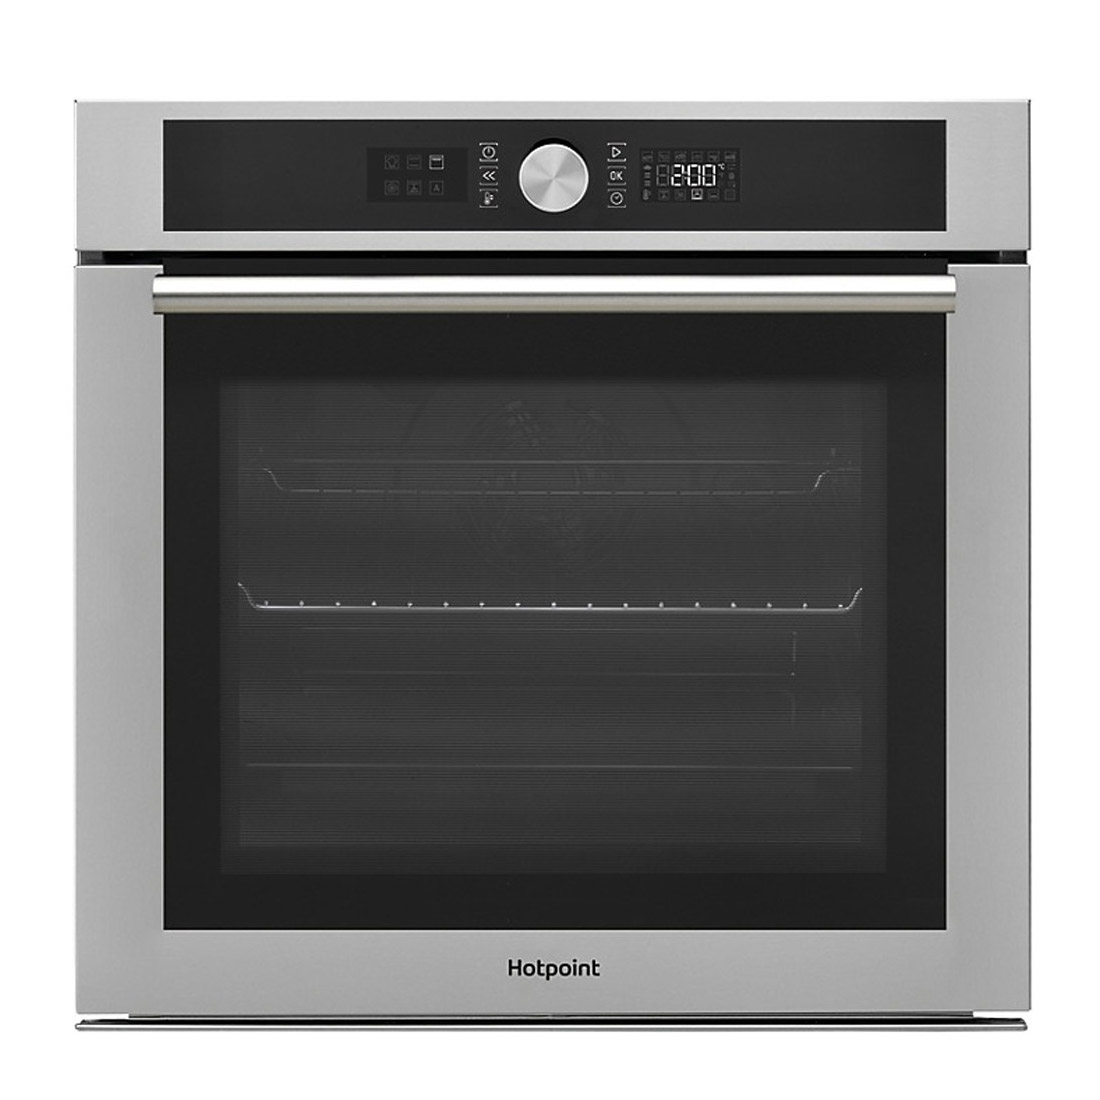 Hotpoint SI4854PIX Built In Electric Single Oven in St Steel 71L